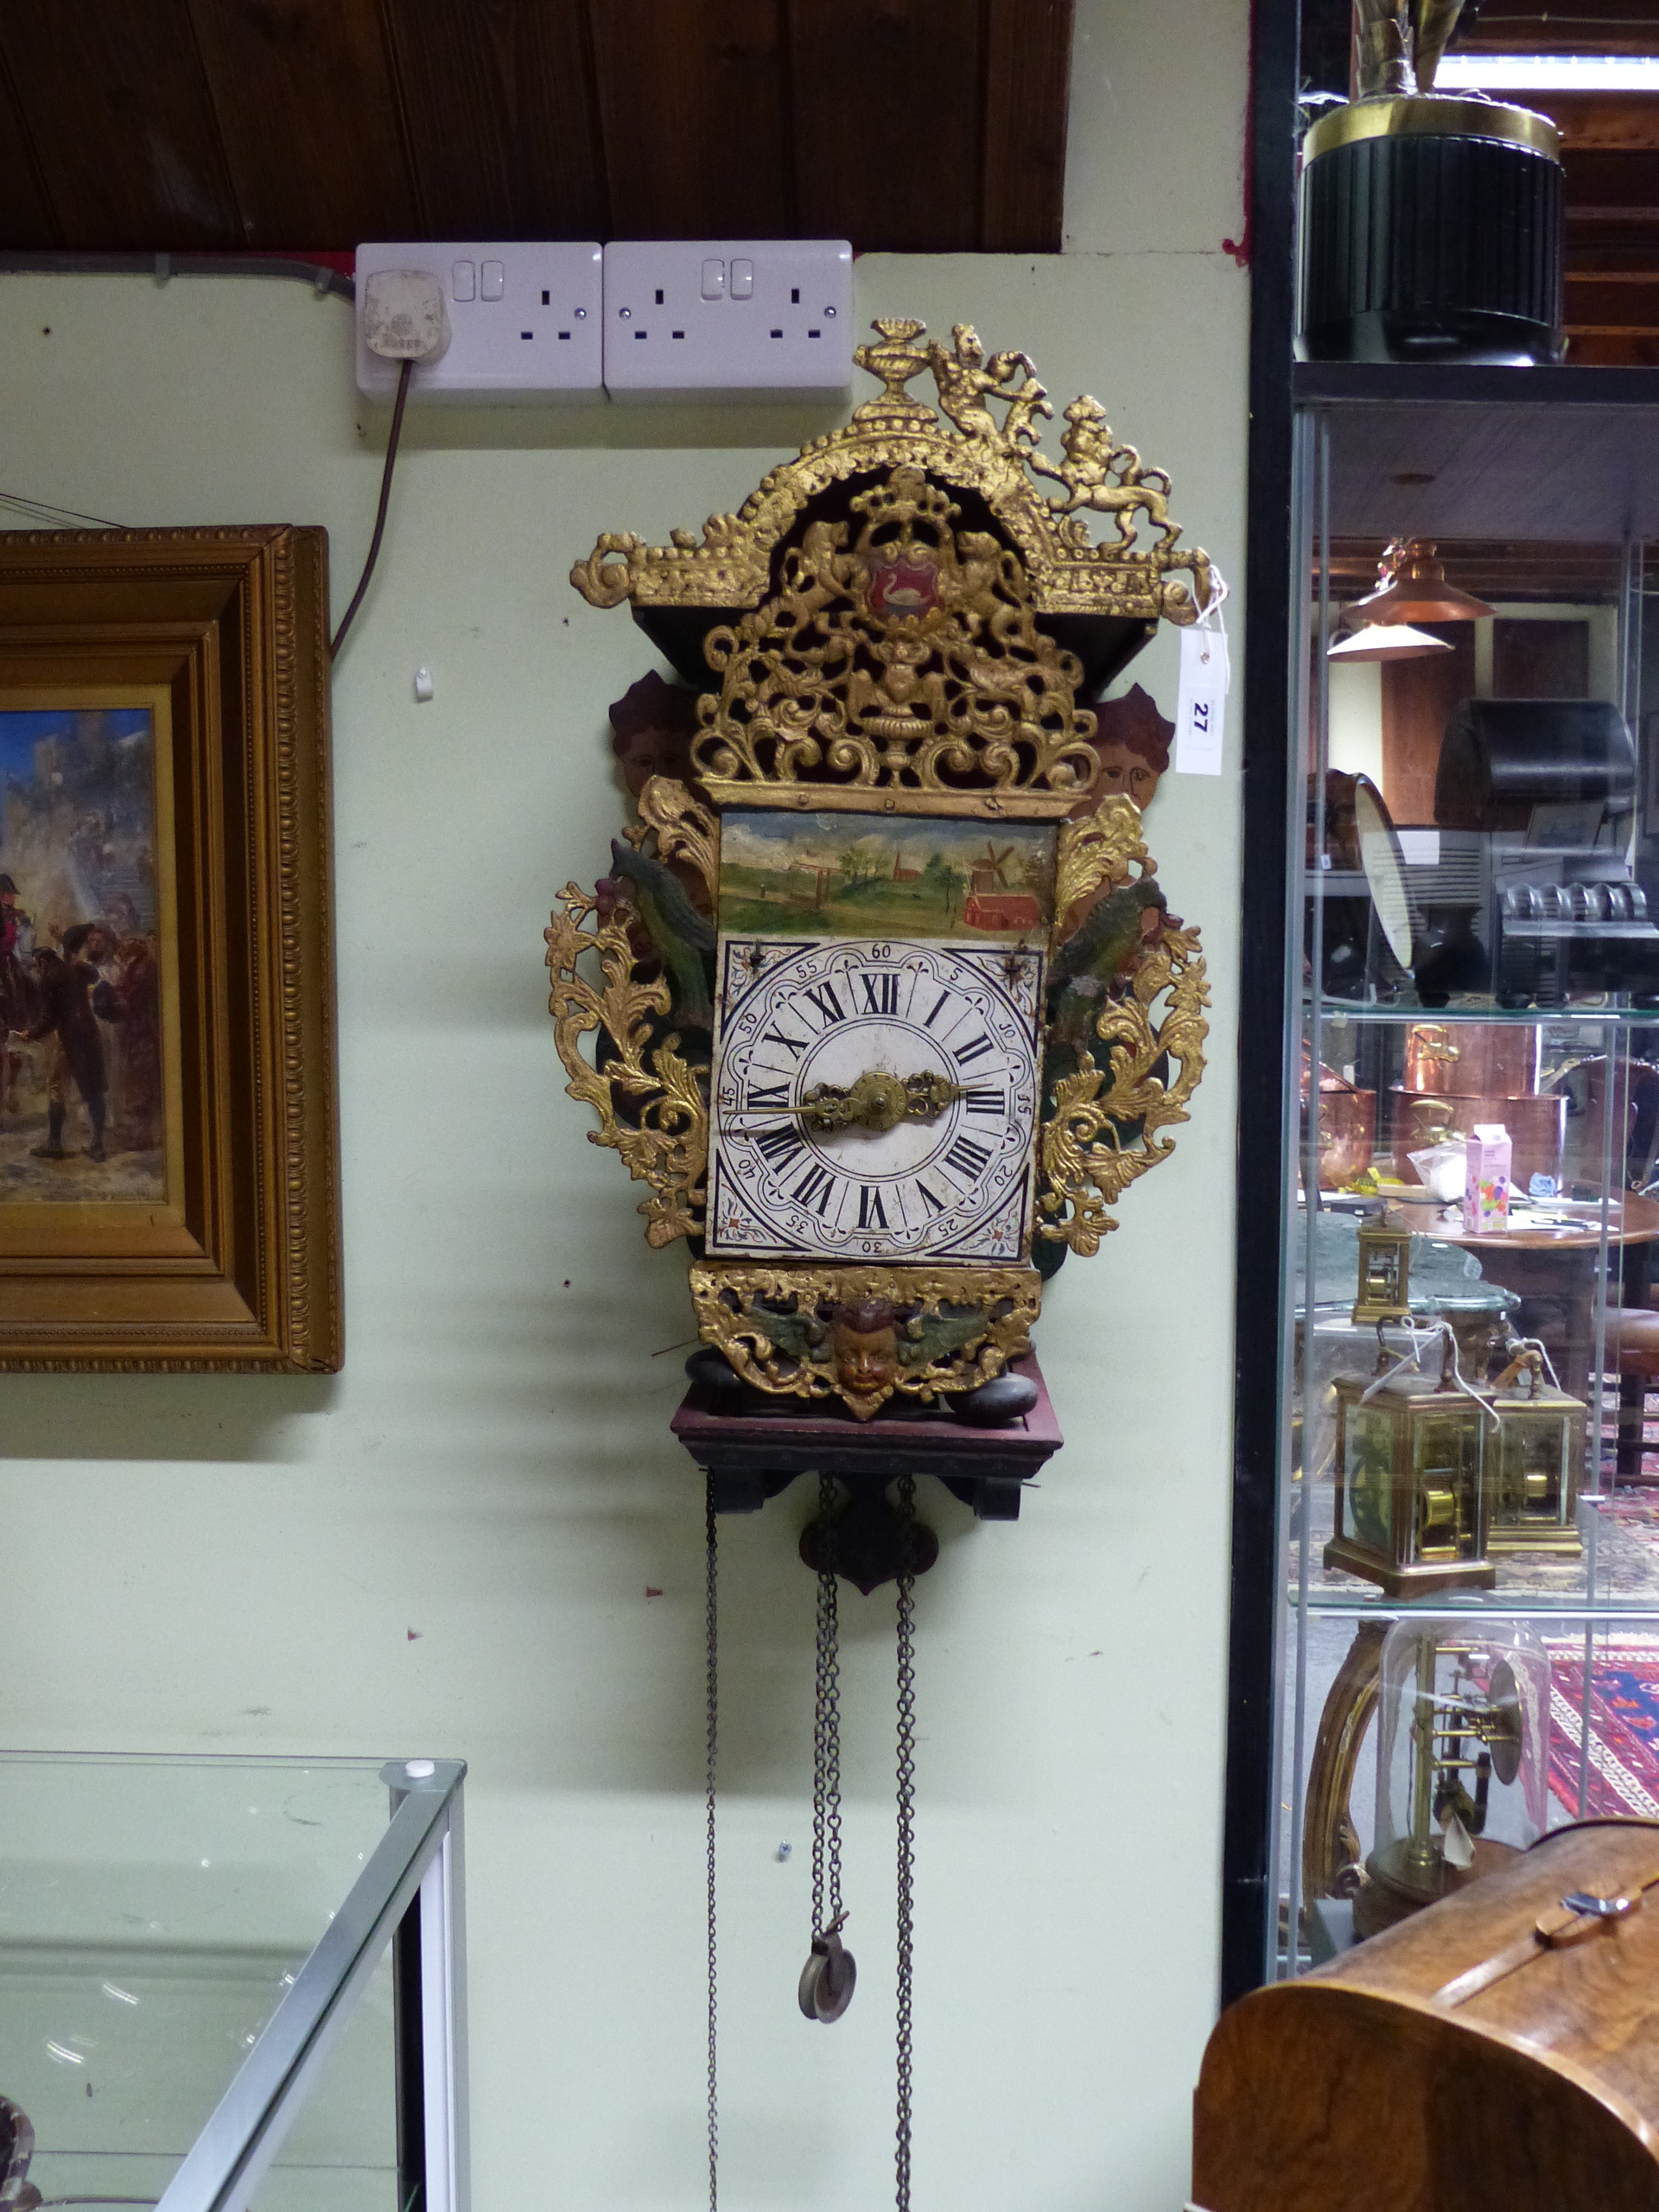 AN ANTIQUE DUTCH STAART WALL CLOCK WITH ORIGINAL PAINTED BRACKET AND PIERCED CAST METAL MOUNTS. - Image 2 of 2